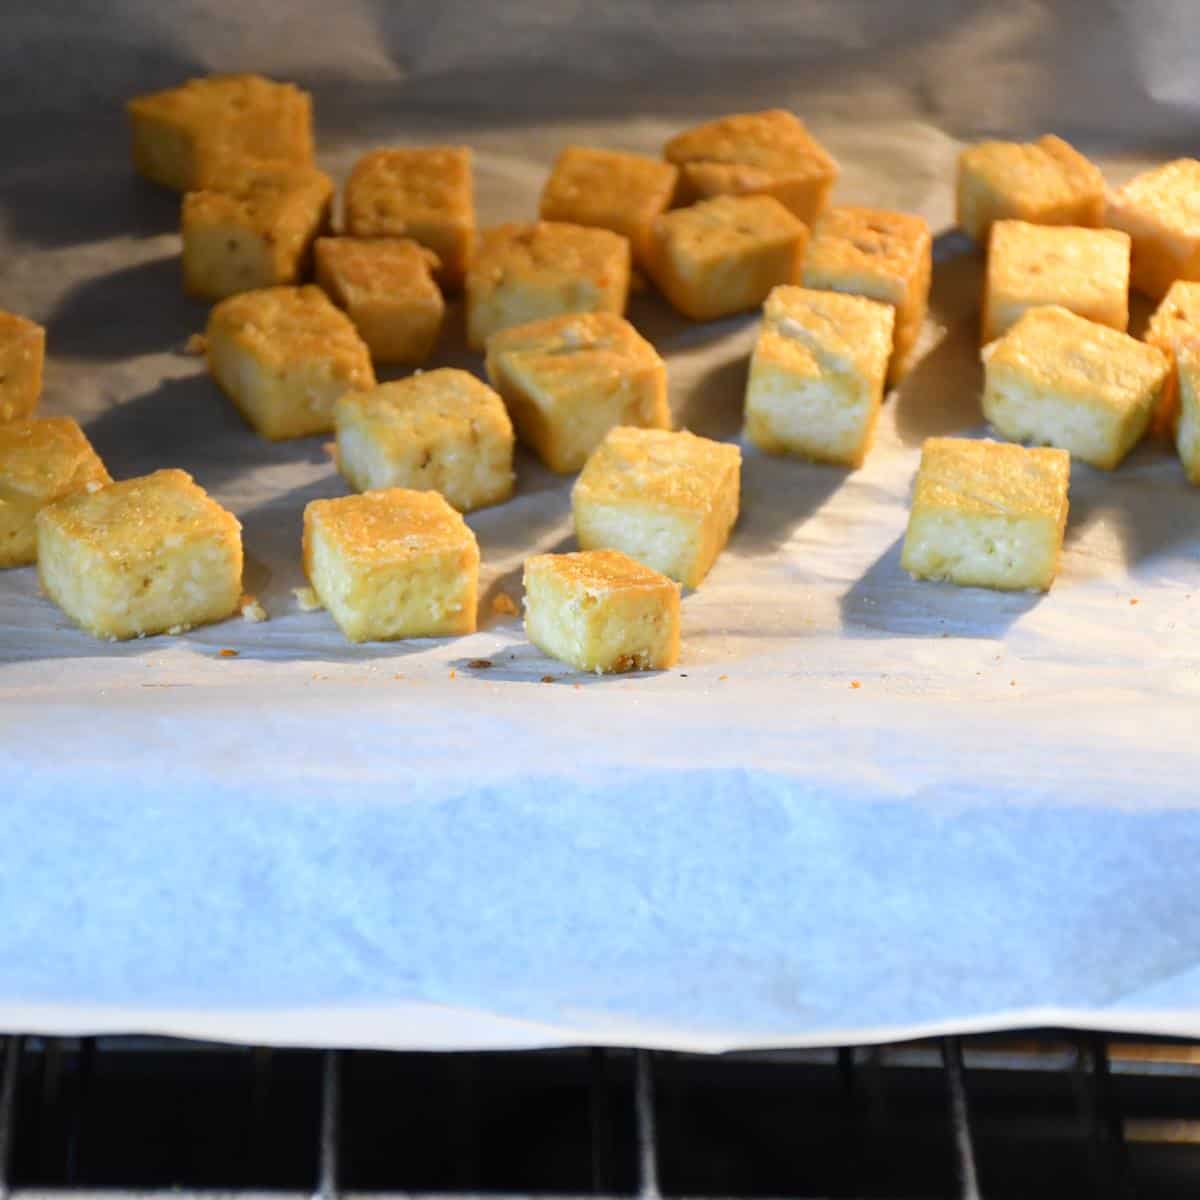 Crispy baked tofu in the oven.